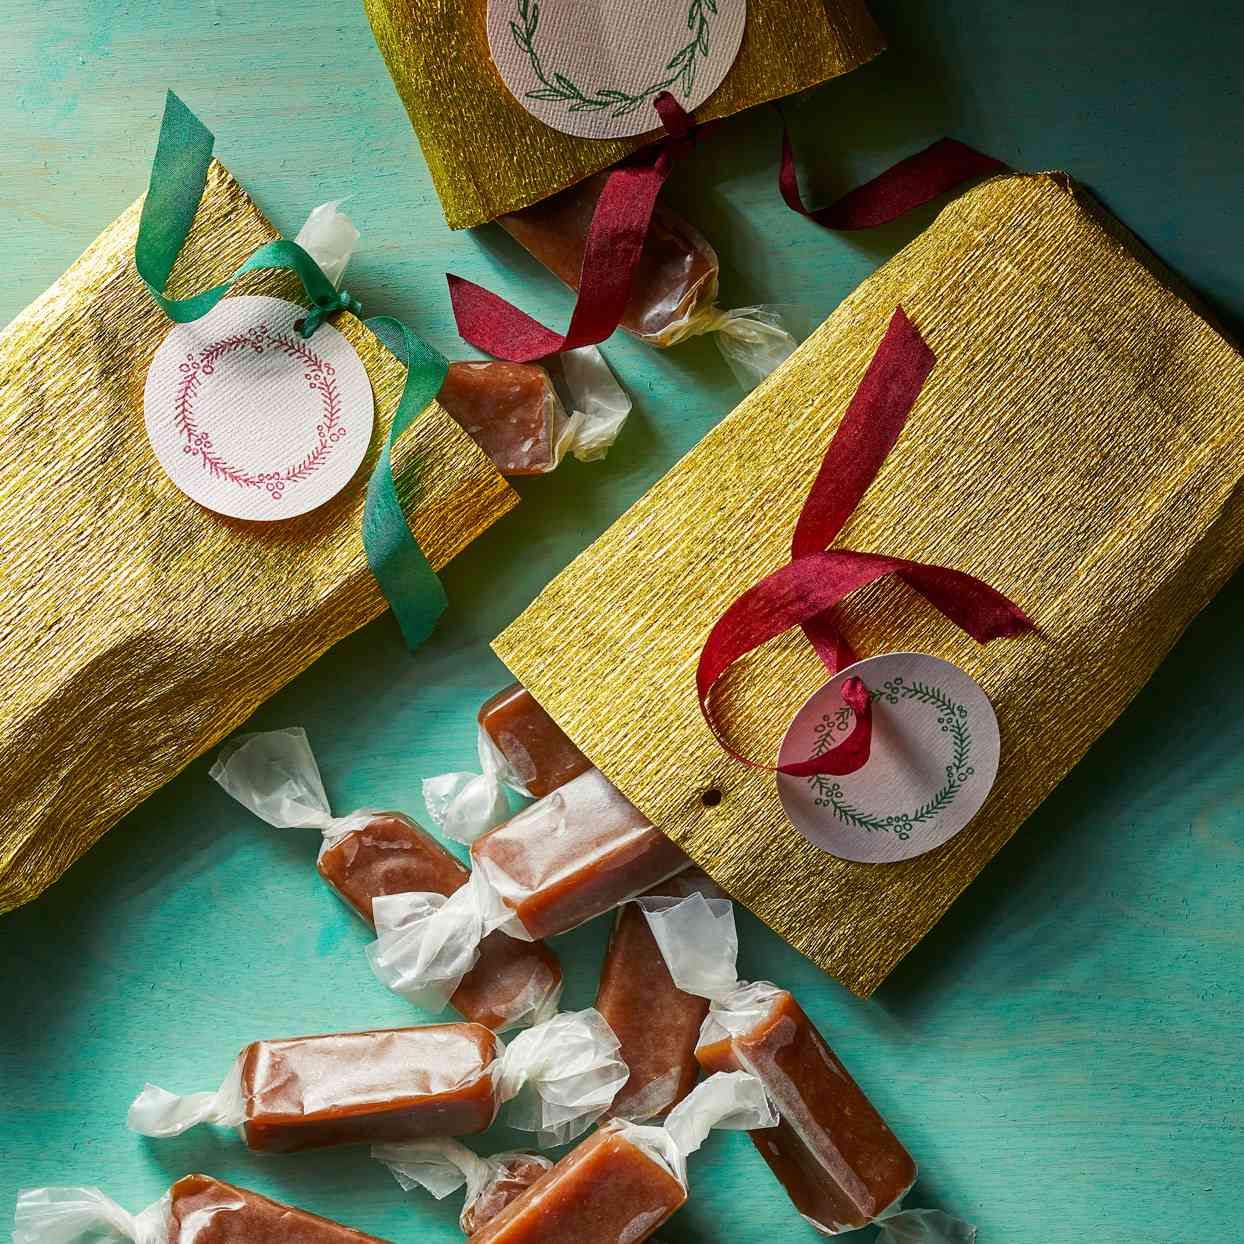 caramel candies in little treat bags